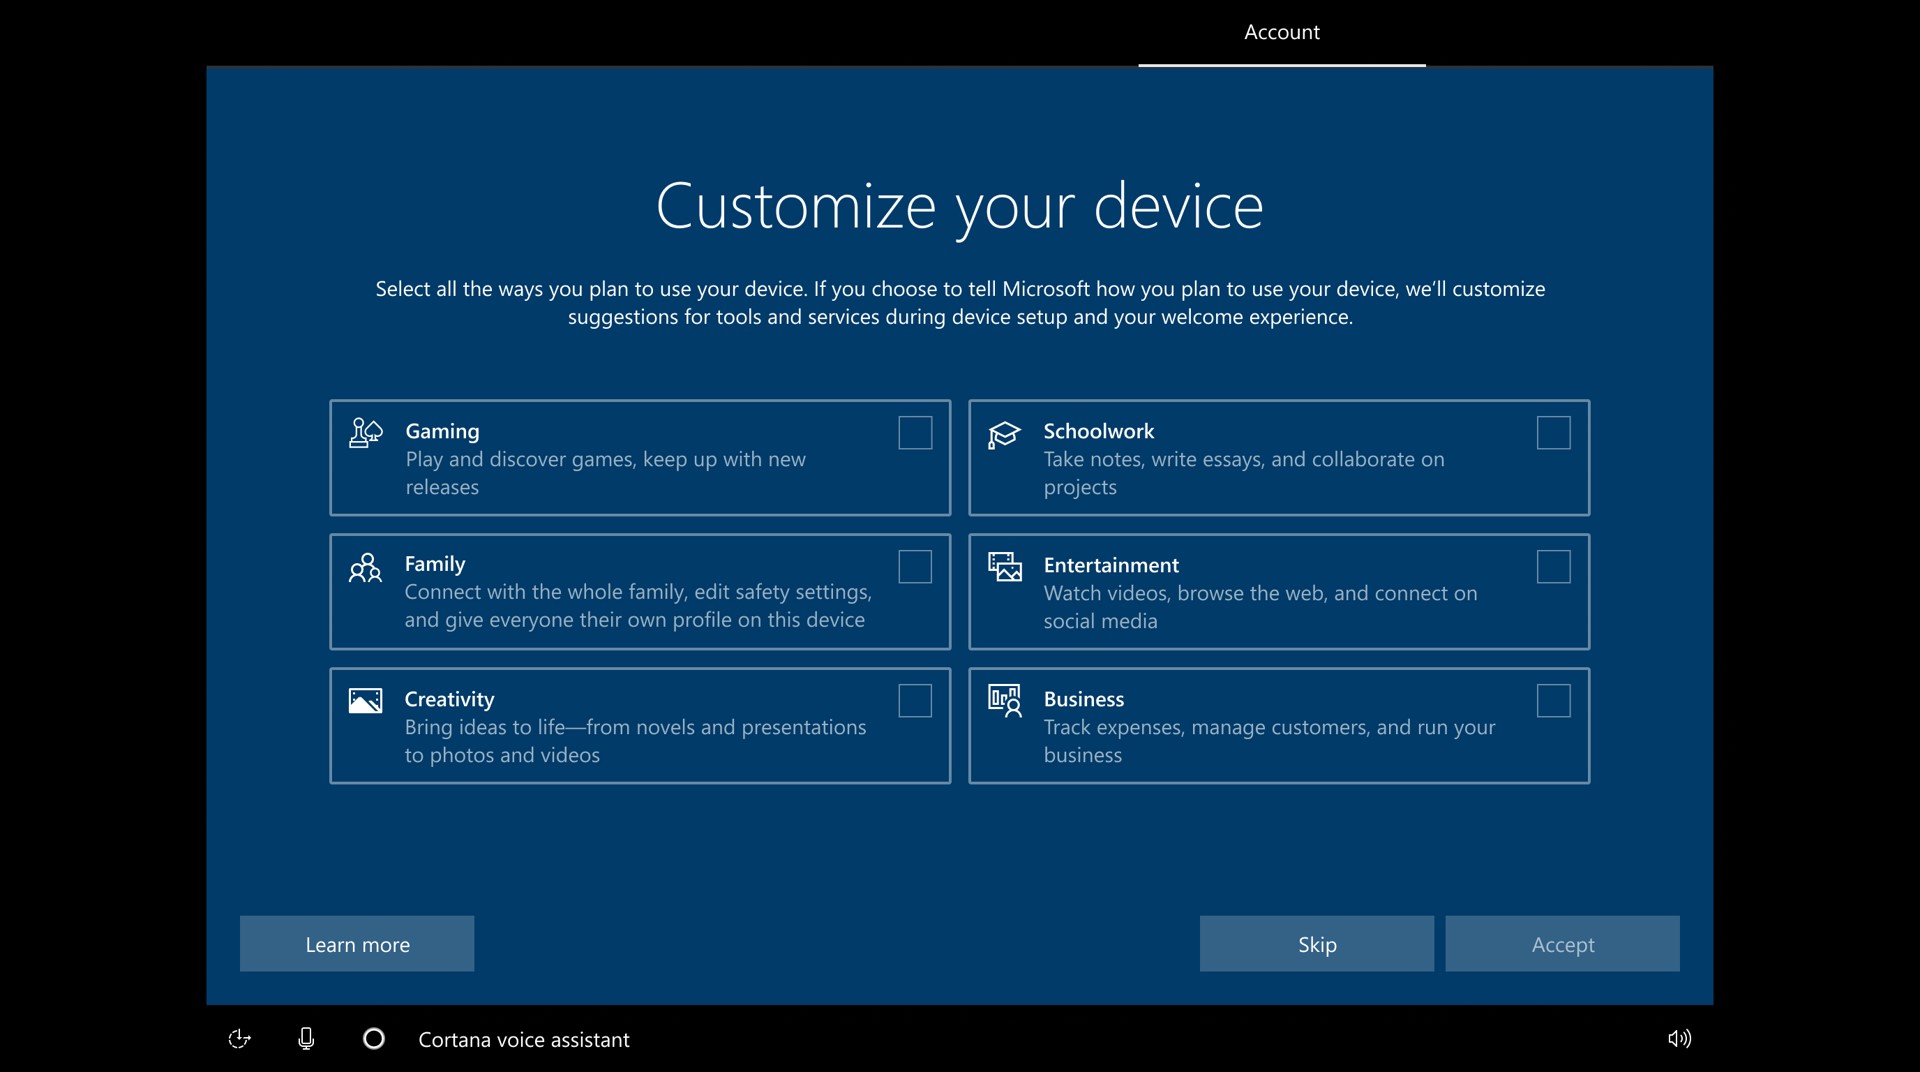 Windows 10 Insider Preview Build 20231.1005 (rs_prerelease) - Oct. 12 Intent.jpg